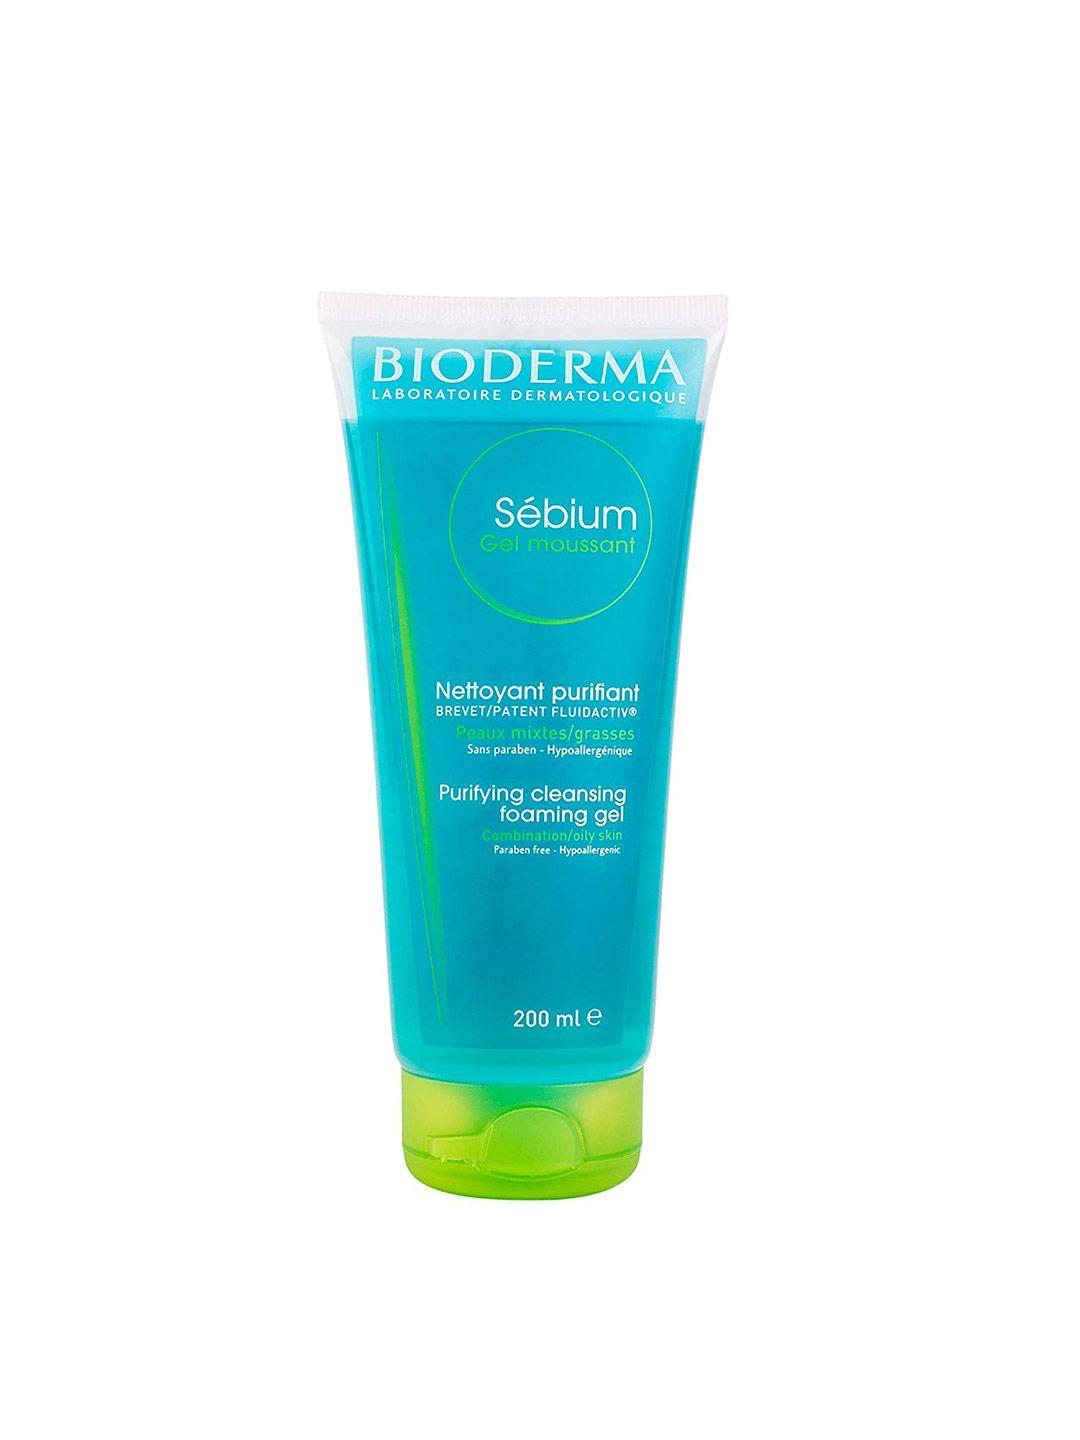 bioderma sebium gel moussant face wash for combination/oily skin 200 ml